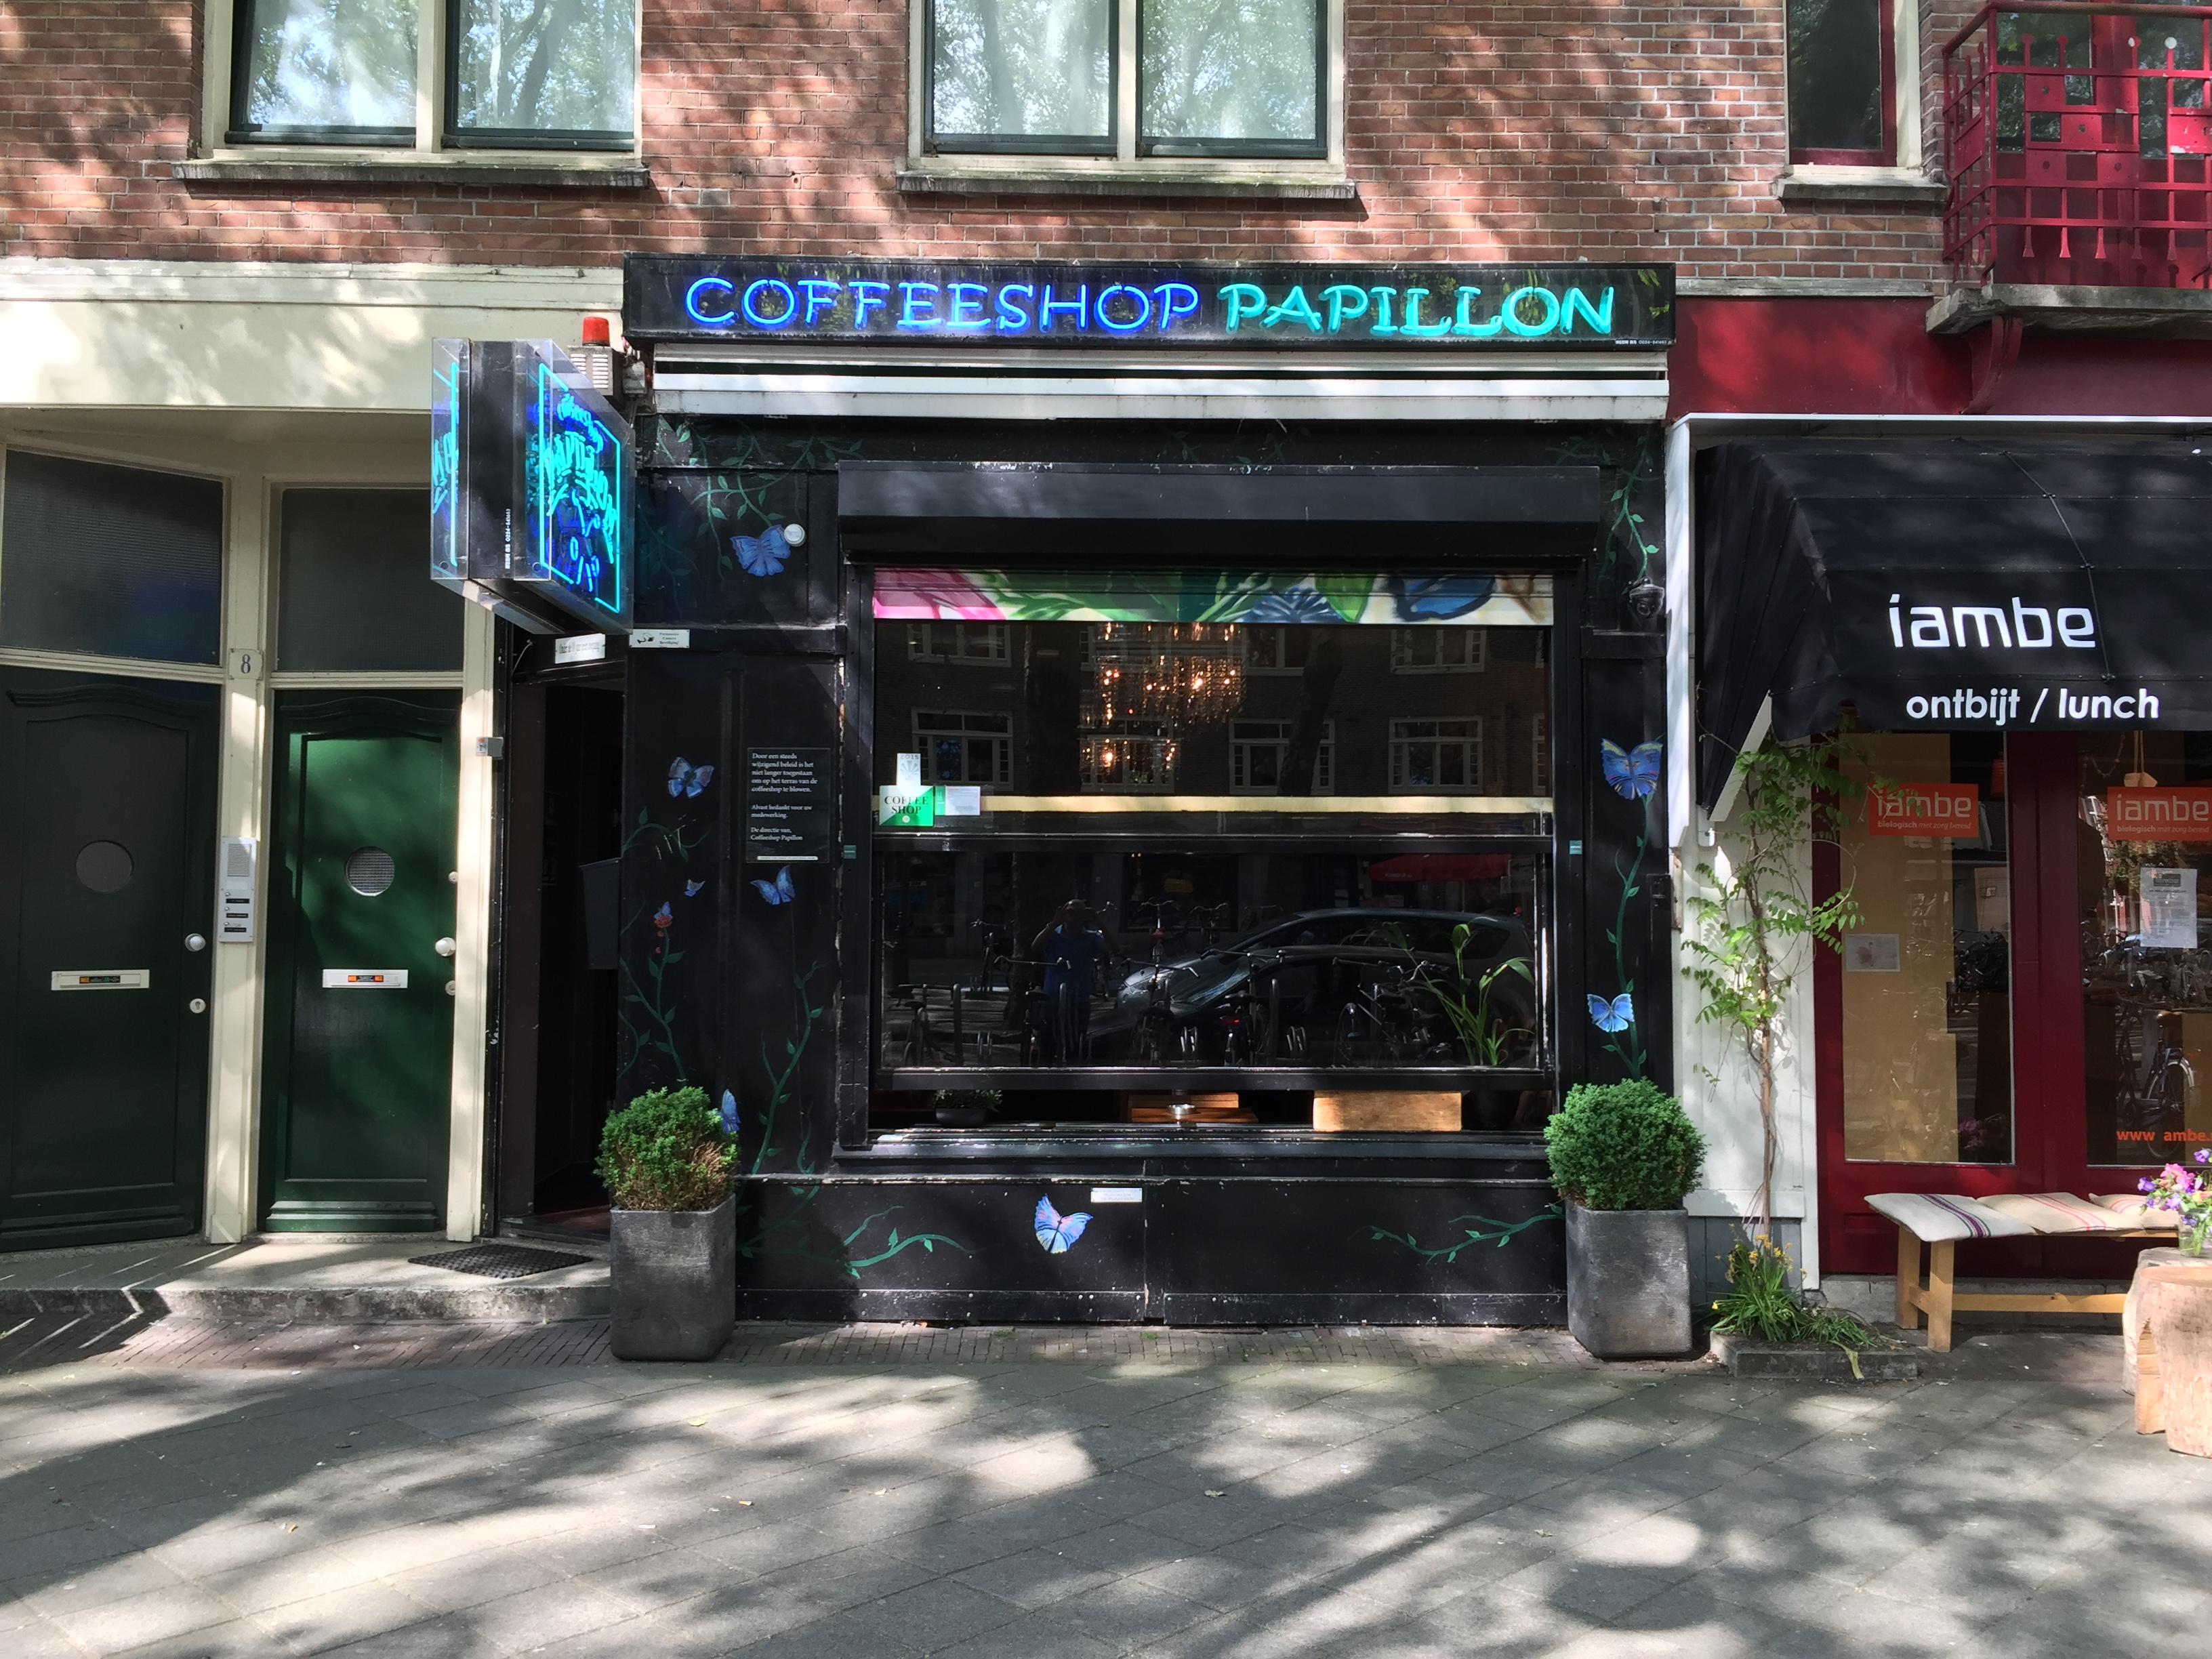 Cover image of this place Coffeeshop Papillion